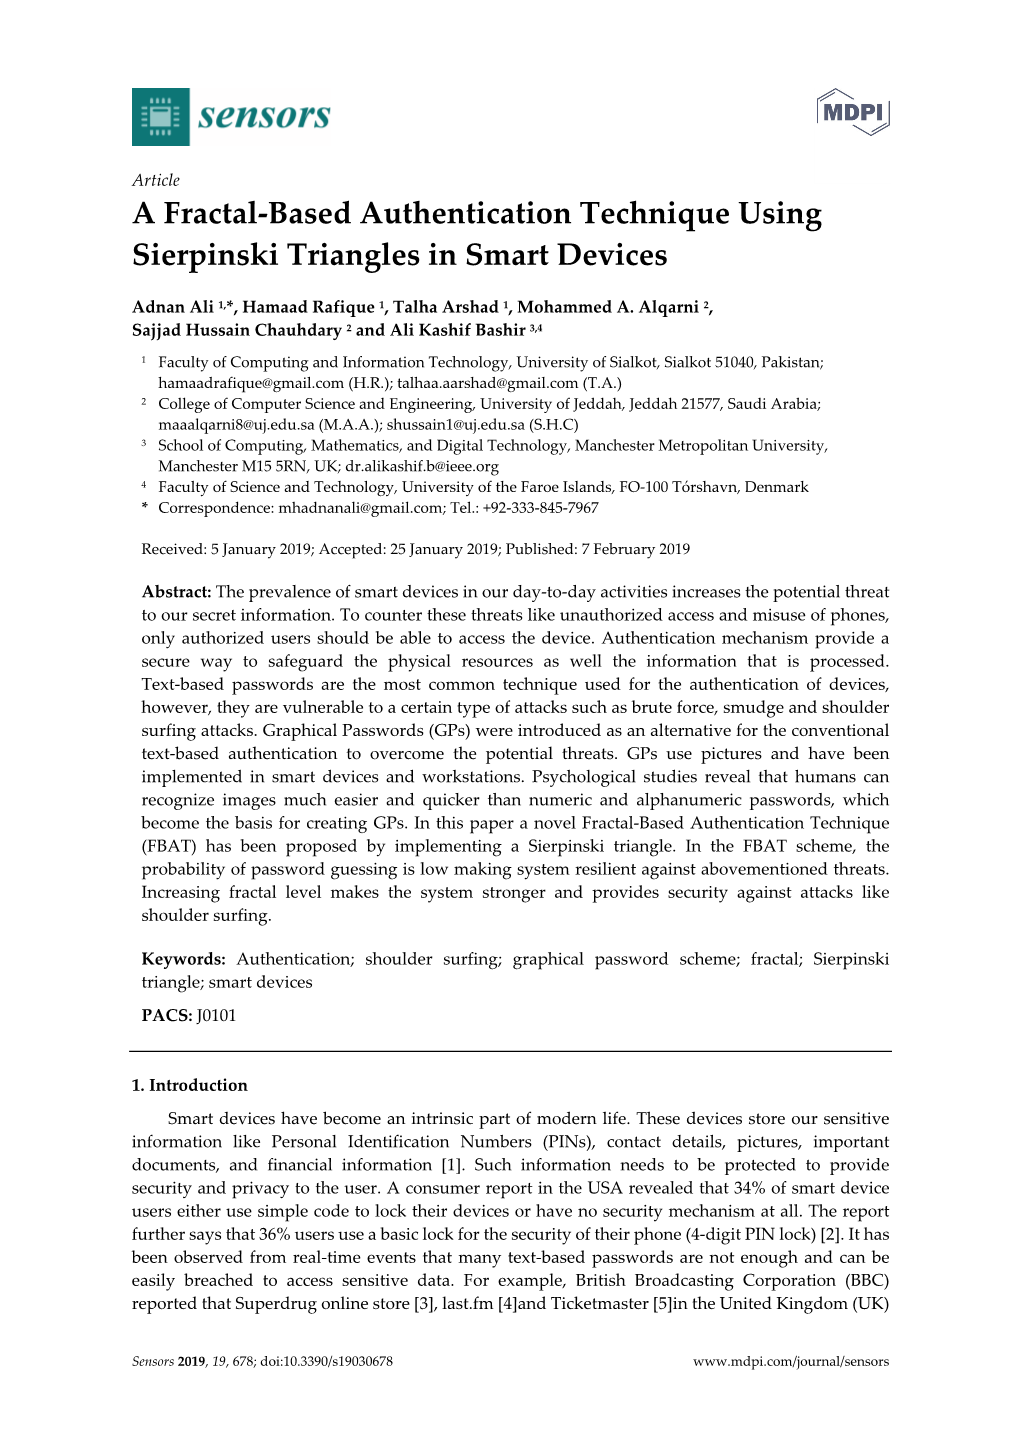 A Fractal-Based Authentication Technique Using Sierpinski Triangles in Smart Devices